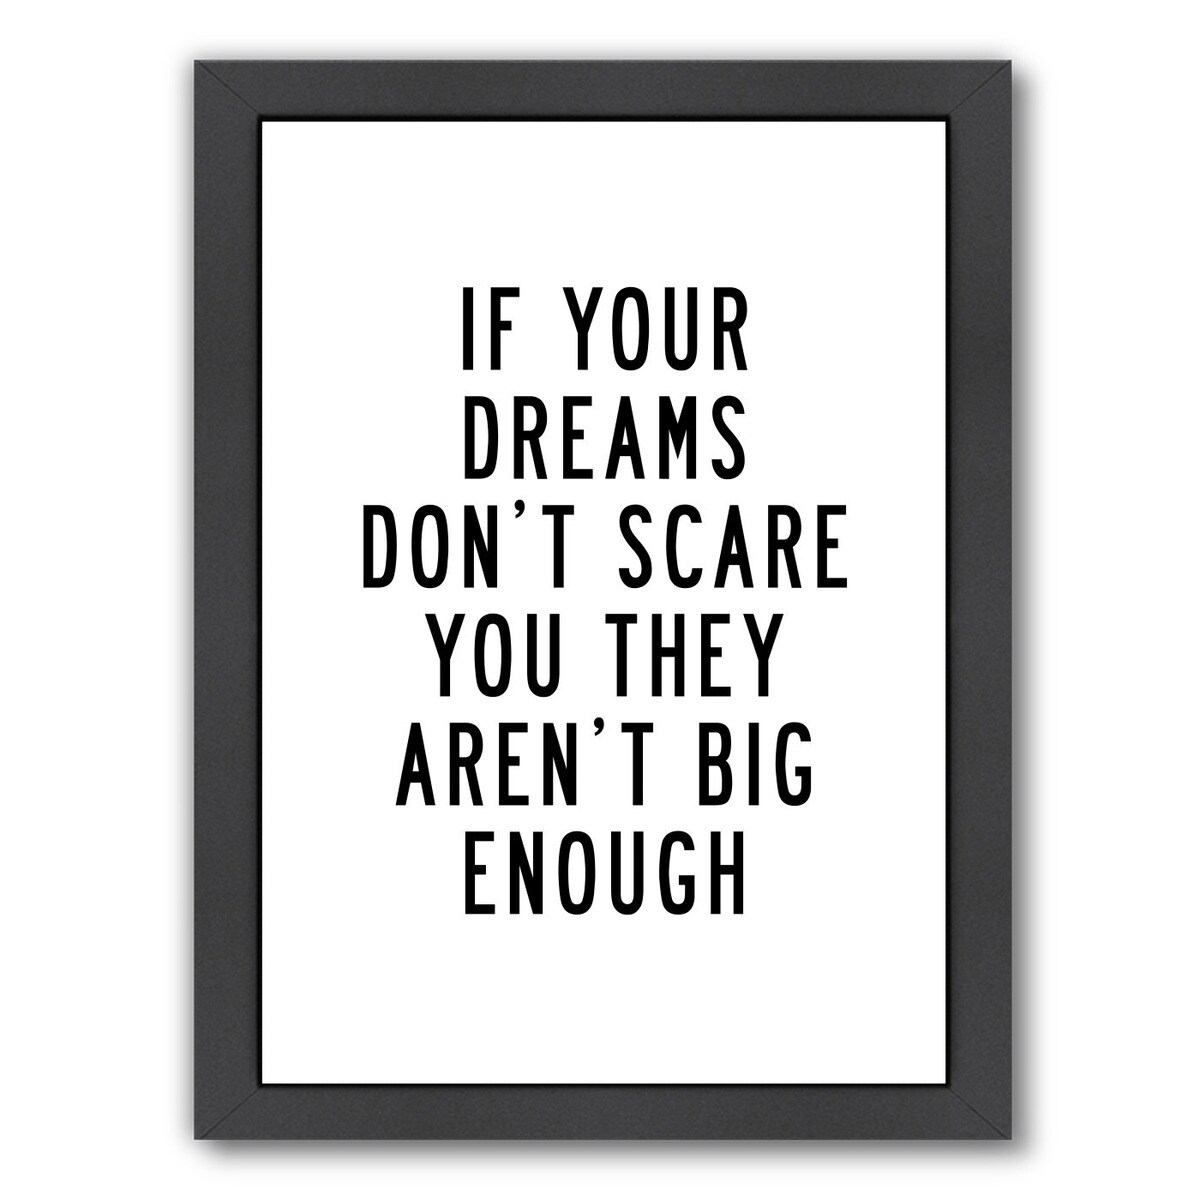 Don't Be Afraid of Your Dreams Digital Wall Art to Uplift You